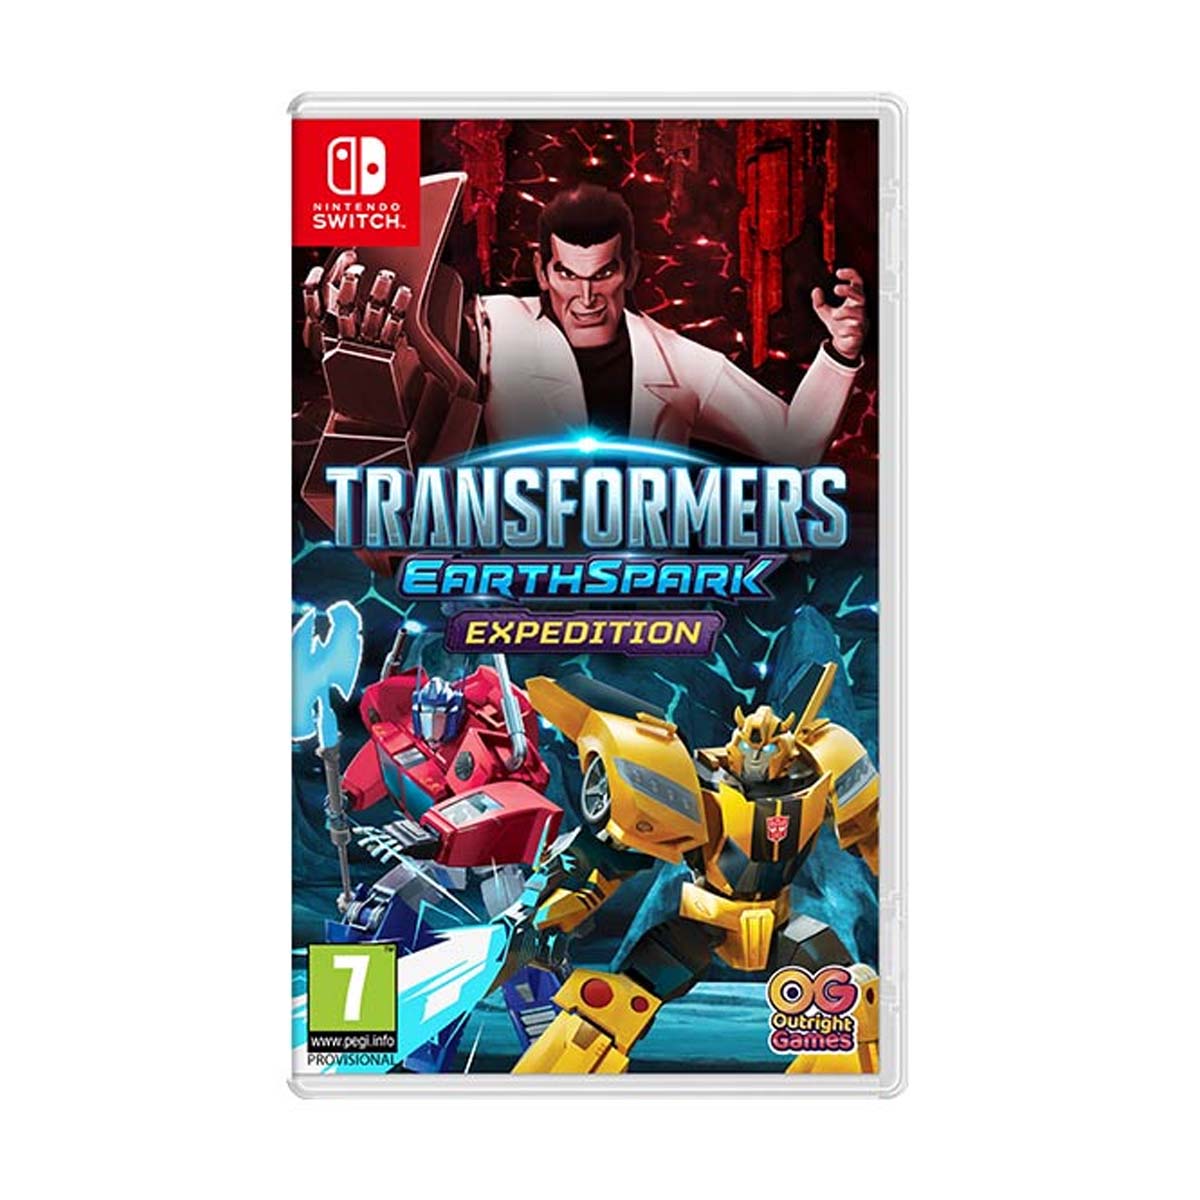 Transformers Earth Spark Expedition. The Transformers (игра). Трансформер Switch. Игрушка с дисками трансформер. Expeditions nintendo switch